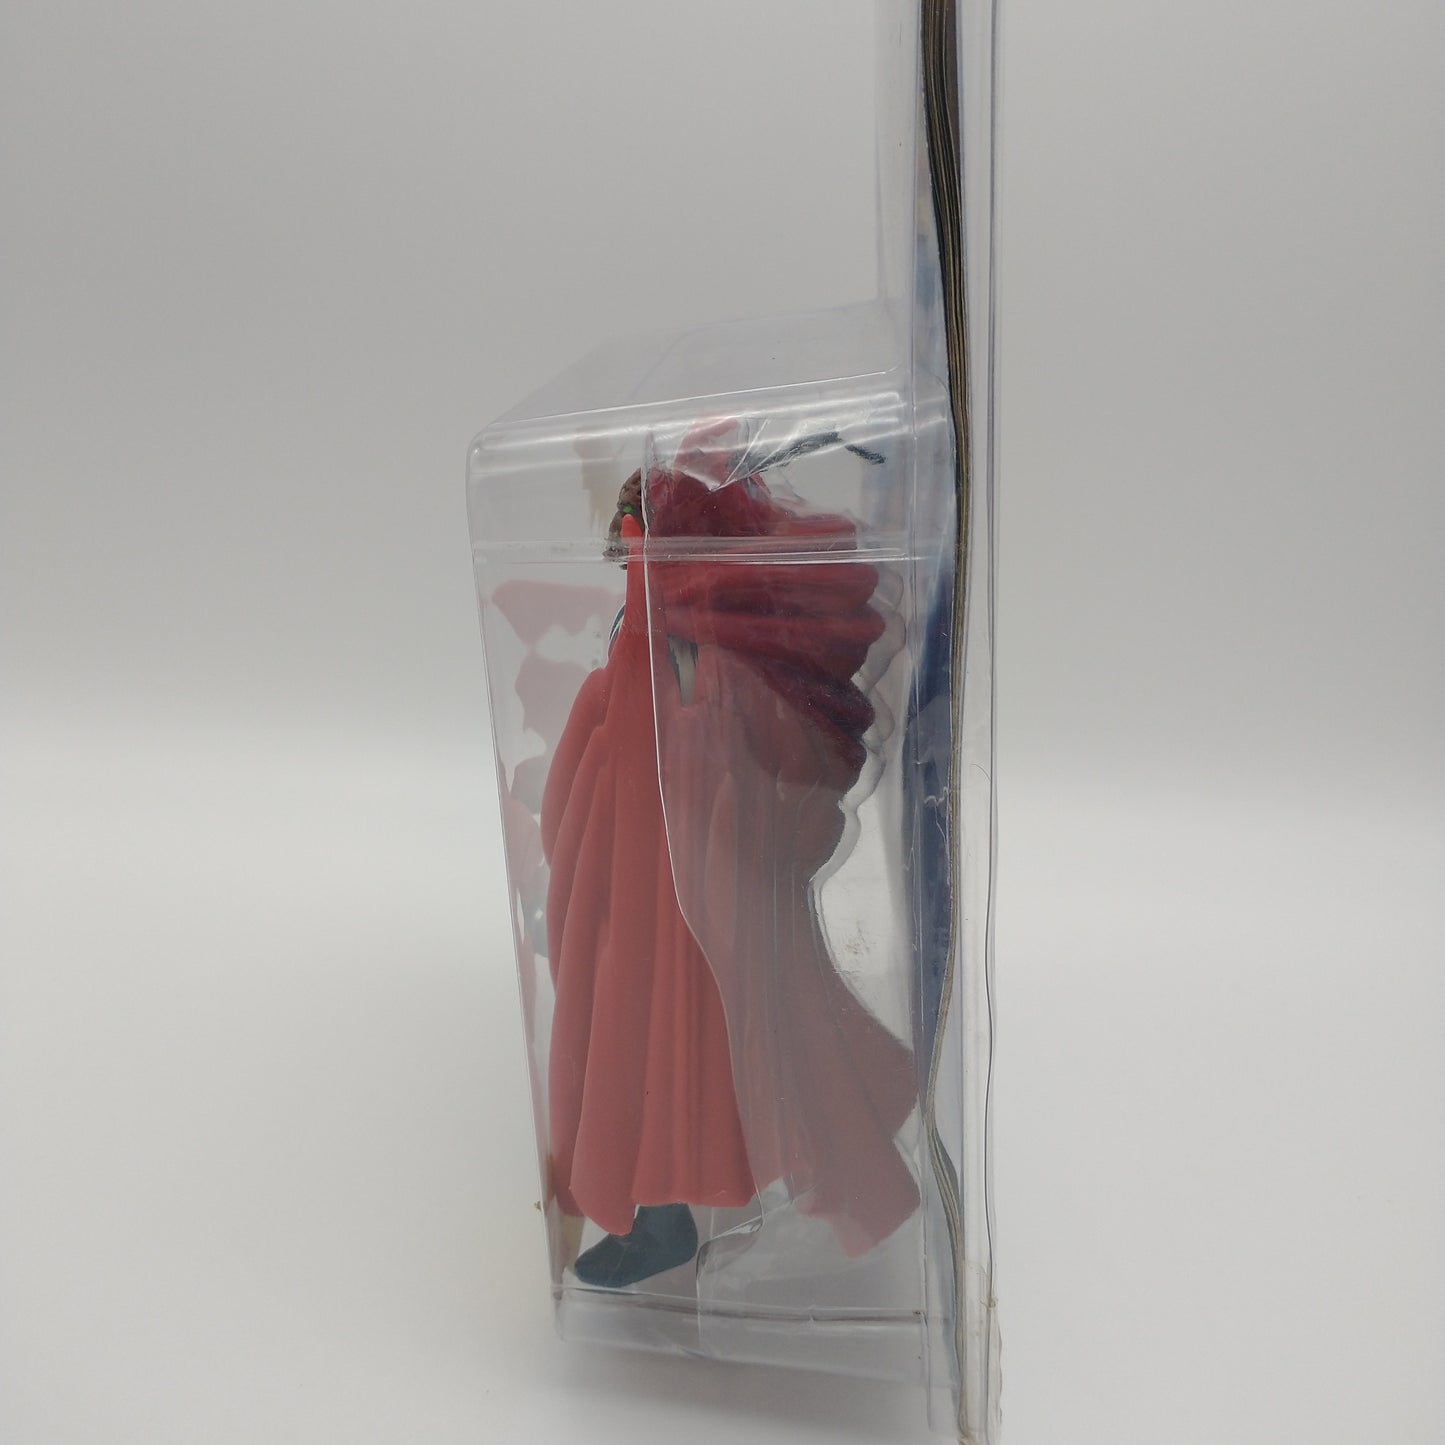 A picture of the left side of the card and bubble. The action figure is inside.